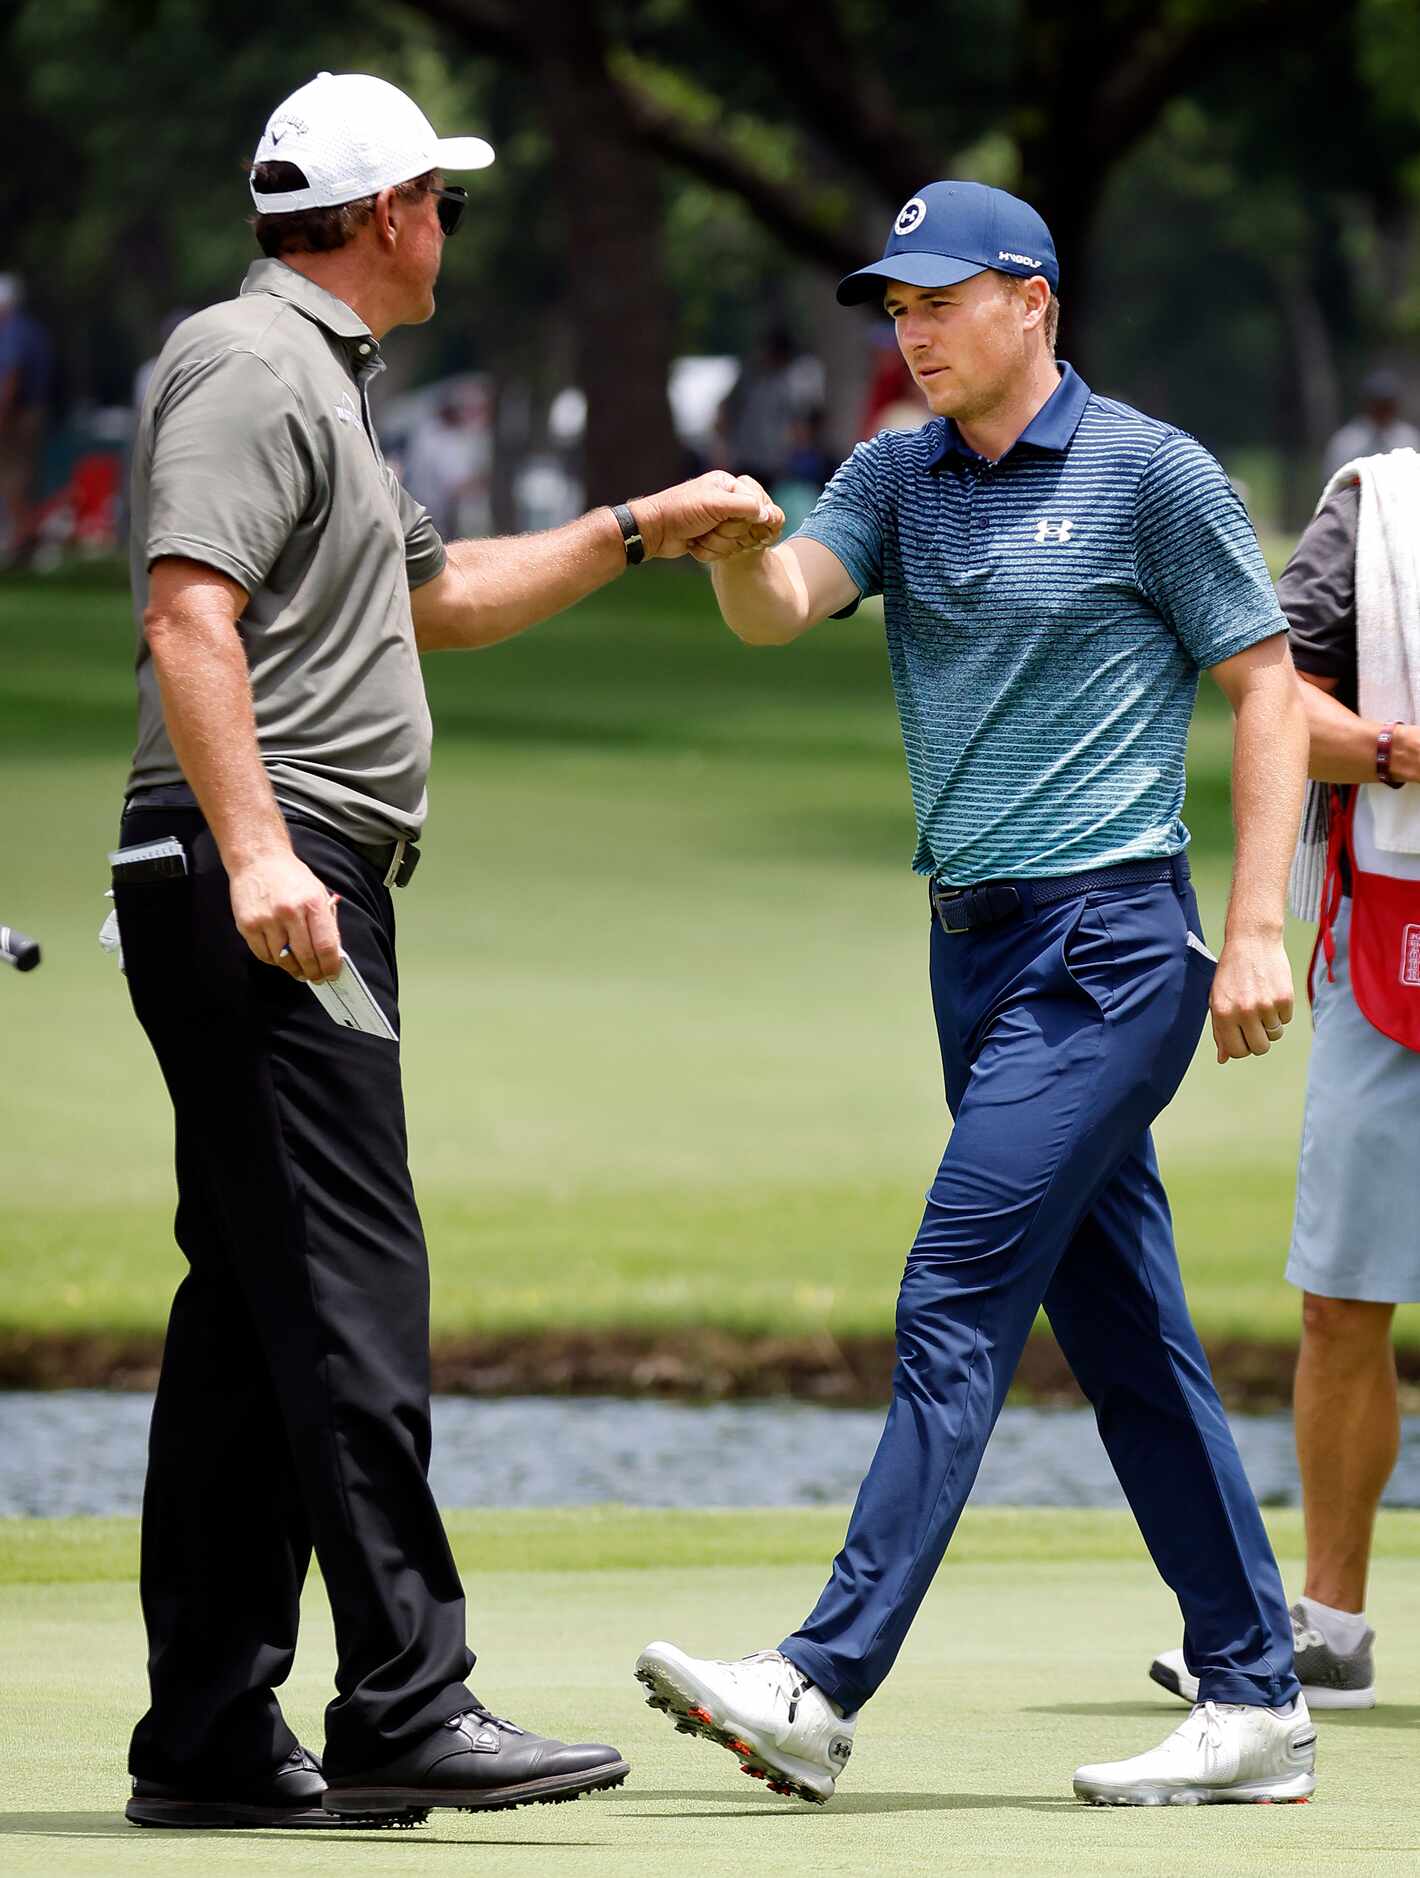 Professional golfer Jordan Spieth fist bumps Phil Mickelson on the 9th green following round...